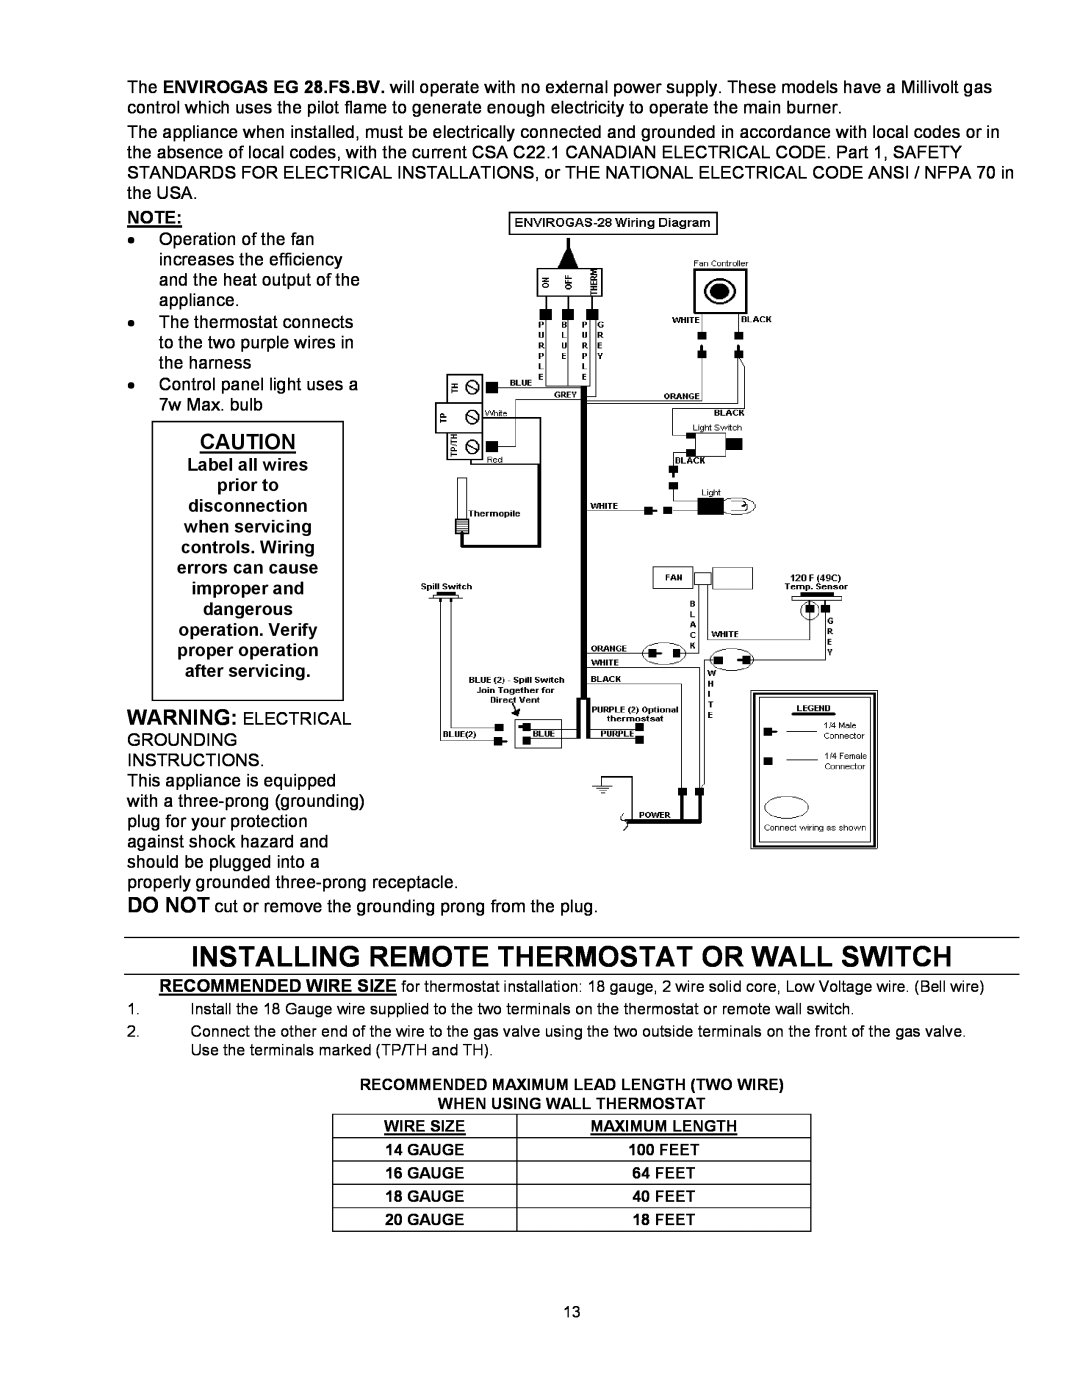 Enviro EG 28 B owner manual Installing Remote Thermostat Or Wall Switch, Label all wires prior to 